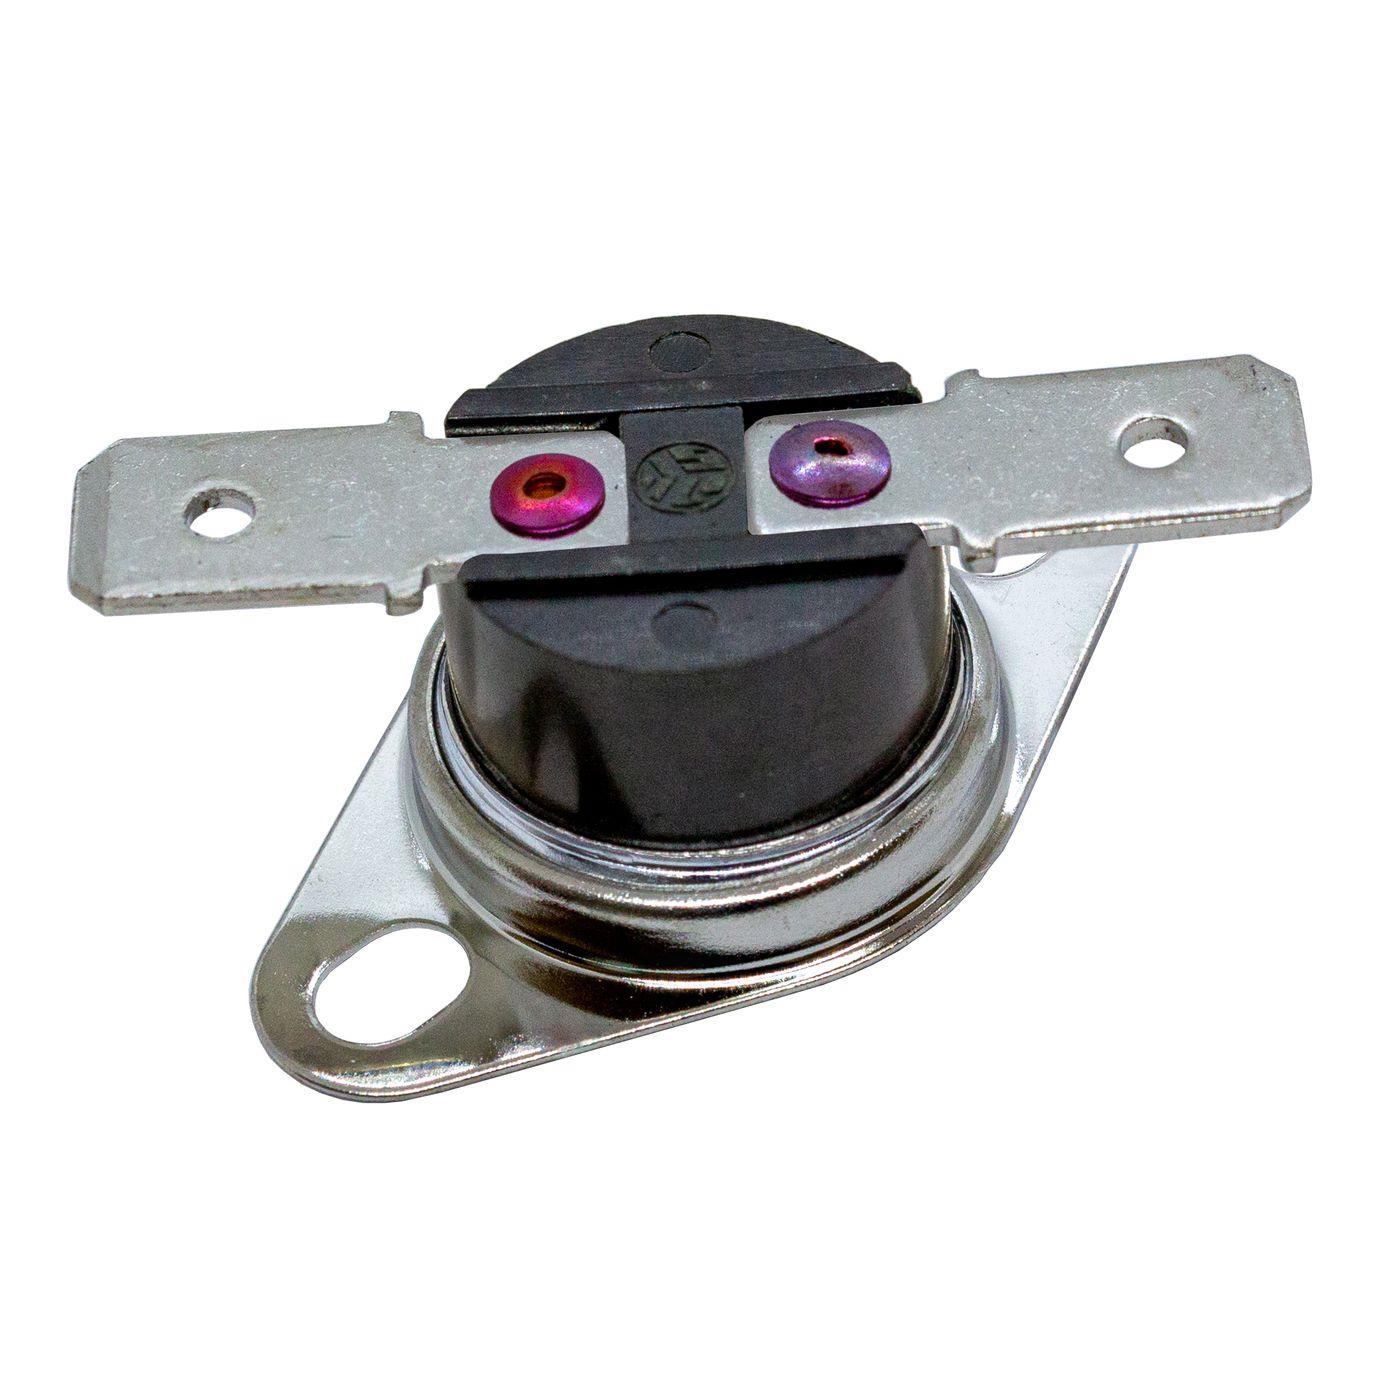 Thermal switch 60°C NC contact 250V 10A Temperature switch thermostat KSD301 Bimetal Thermal protection